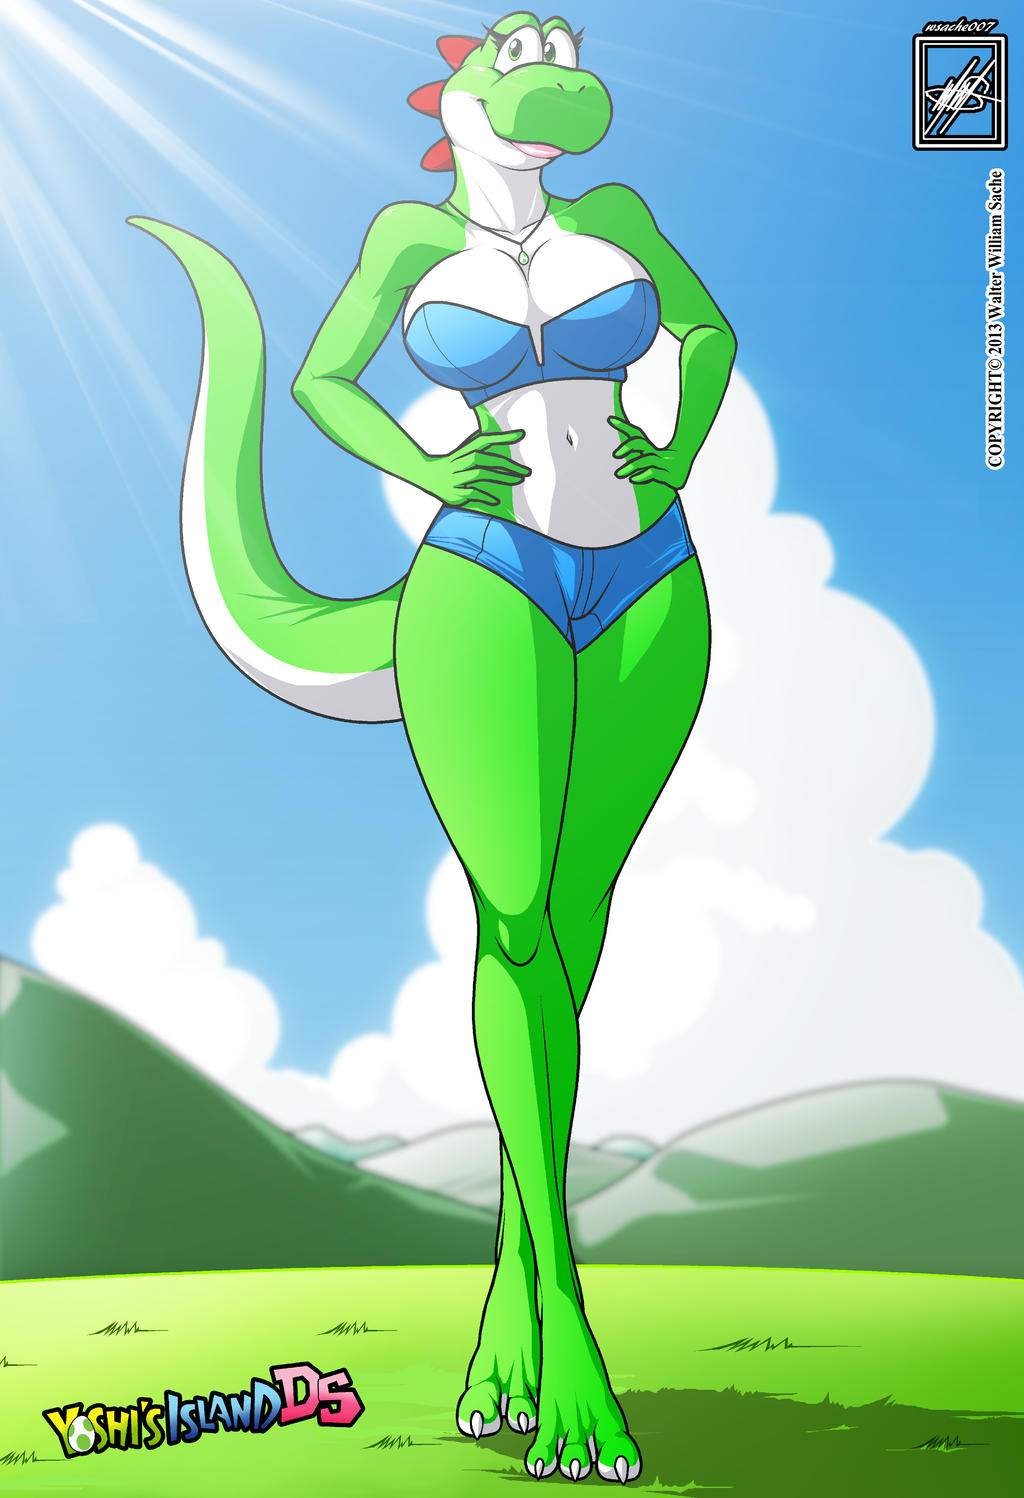 Female Yoshi gal_completed X3